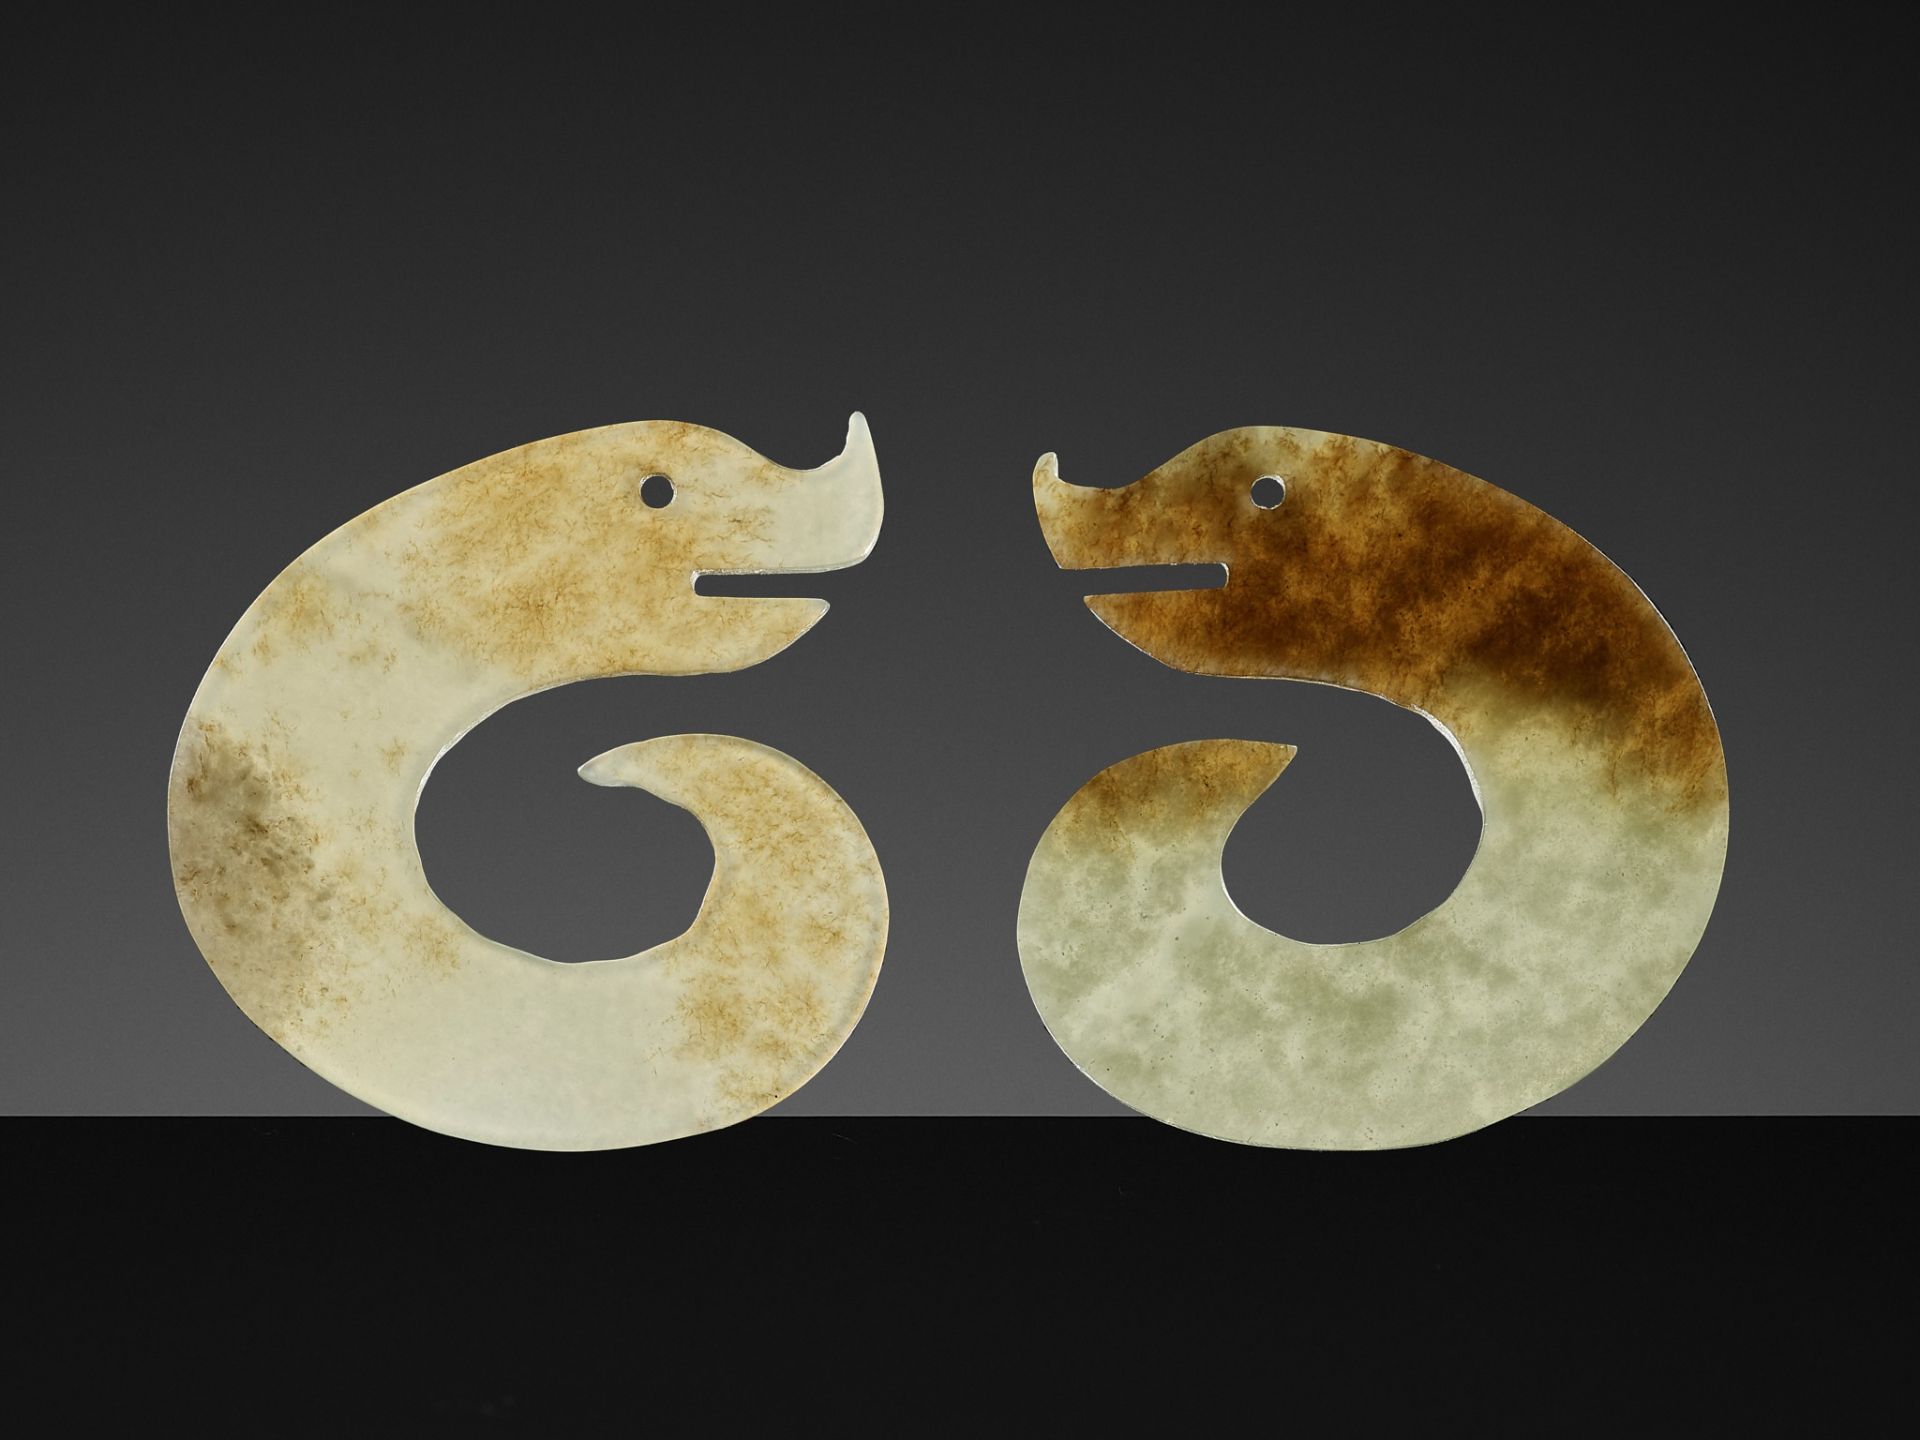 A PAIR OF C-SHAPED 'DRAGON' PENDANTS, ERLITOU PERIOD TO SHANG DYNASTY